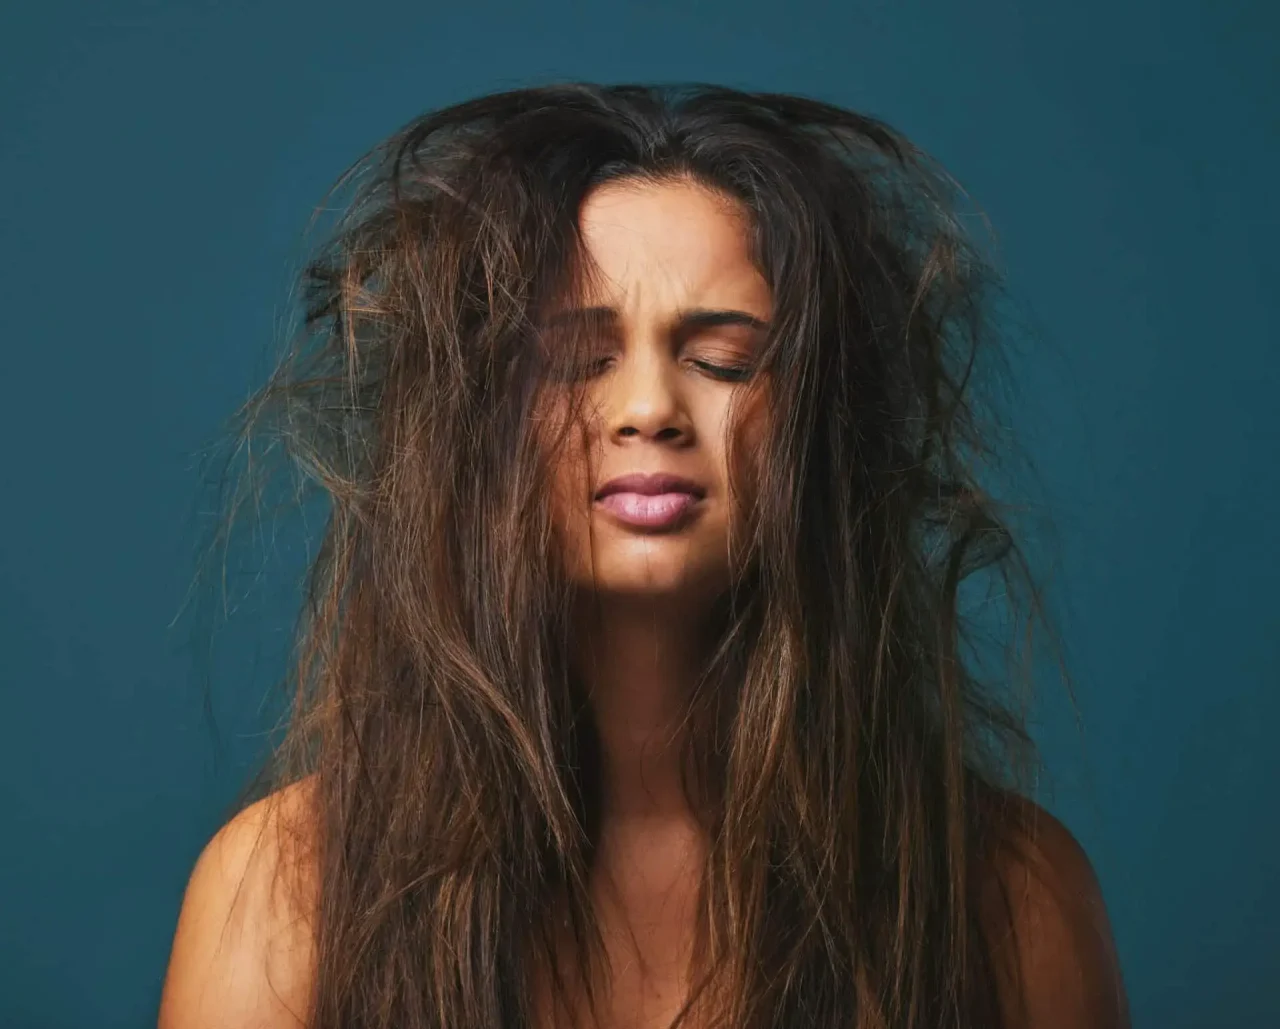 How to get rid of the frizz on top of your head